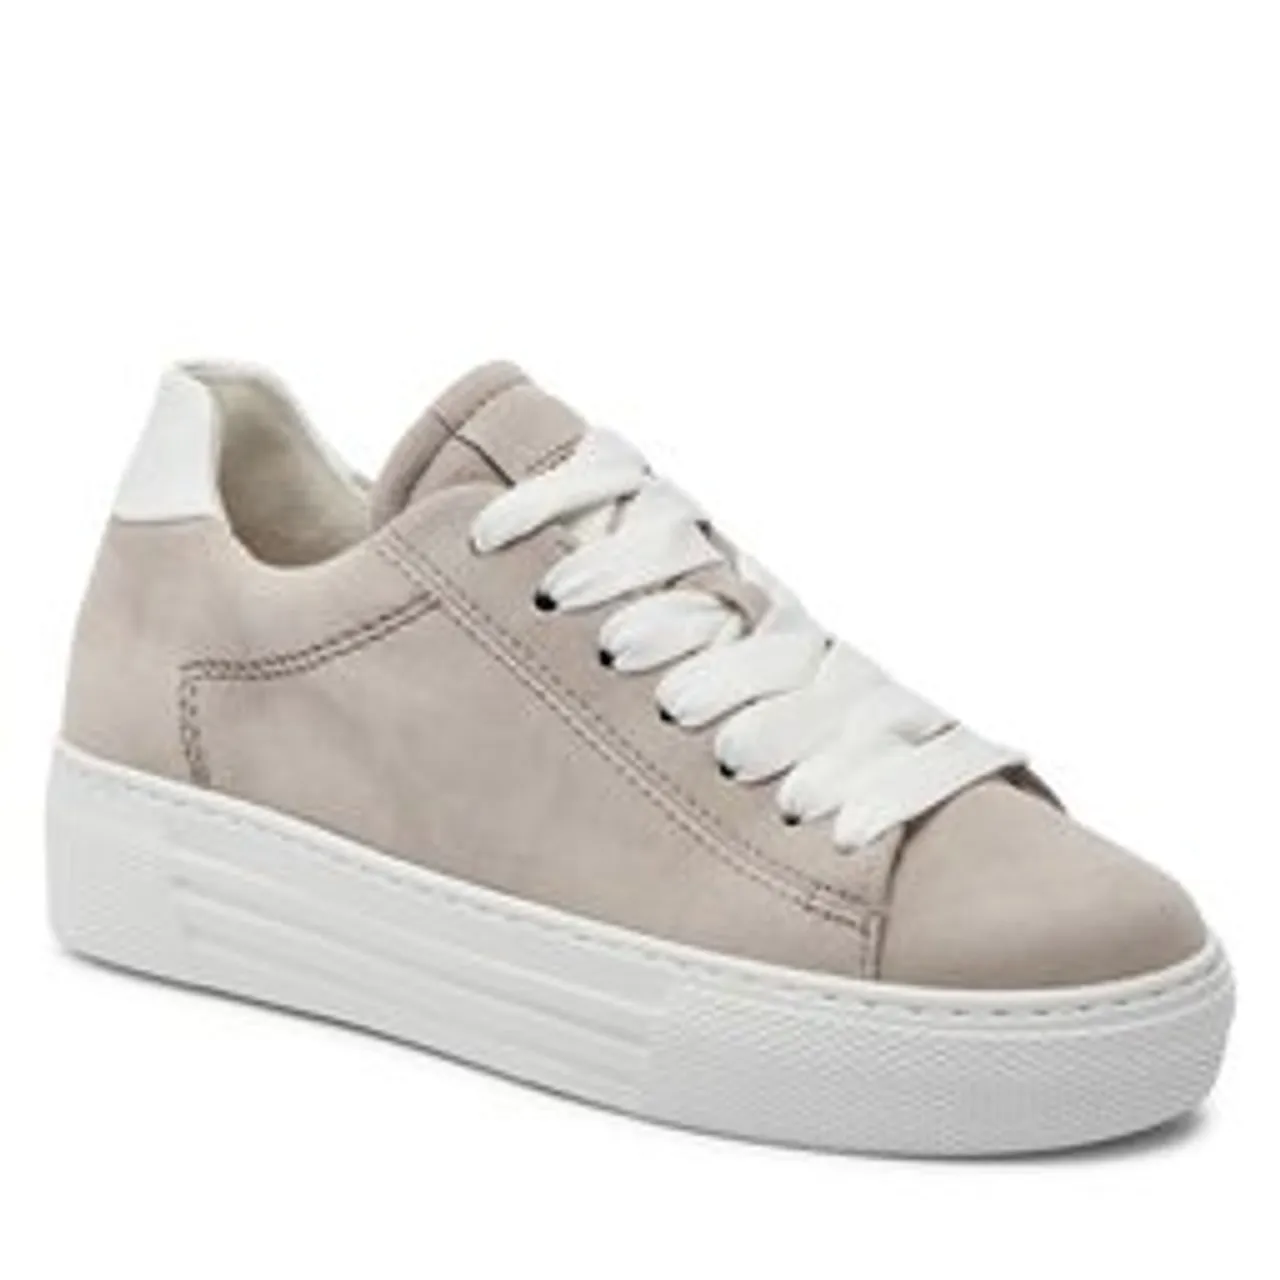 Sneakers Gabor 46.460.12 Puder/Weiss 12